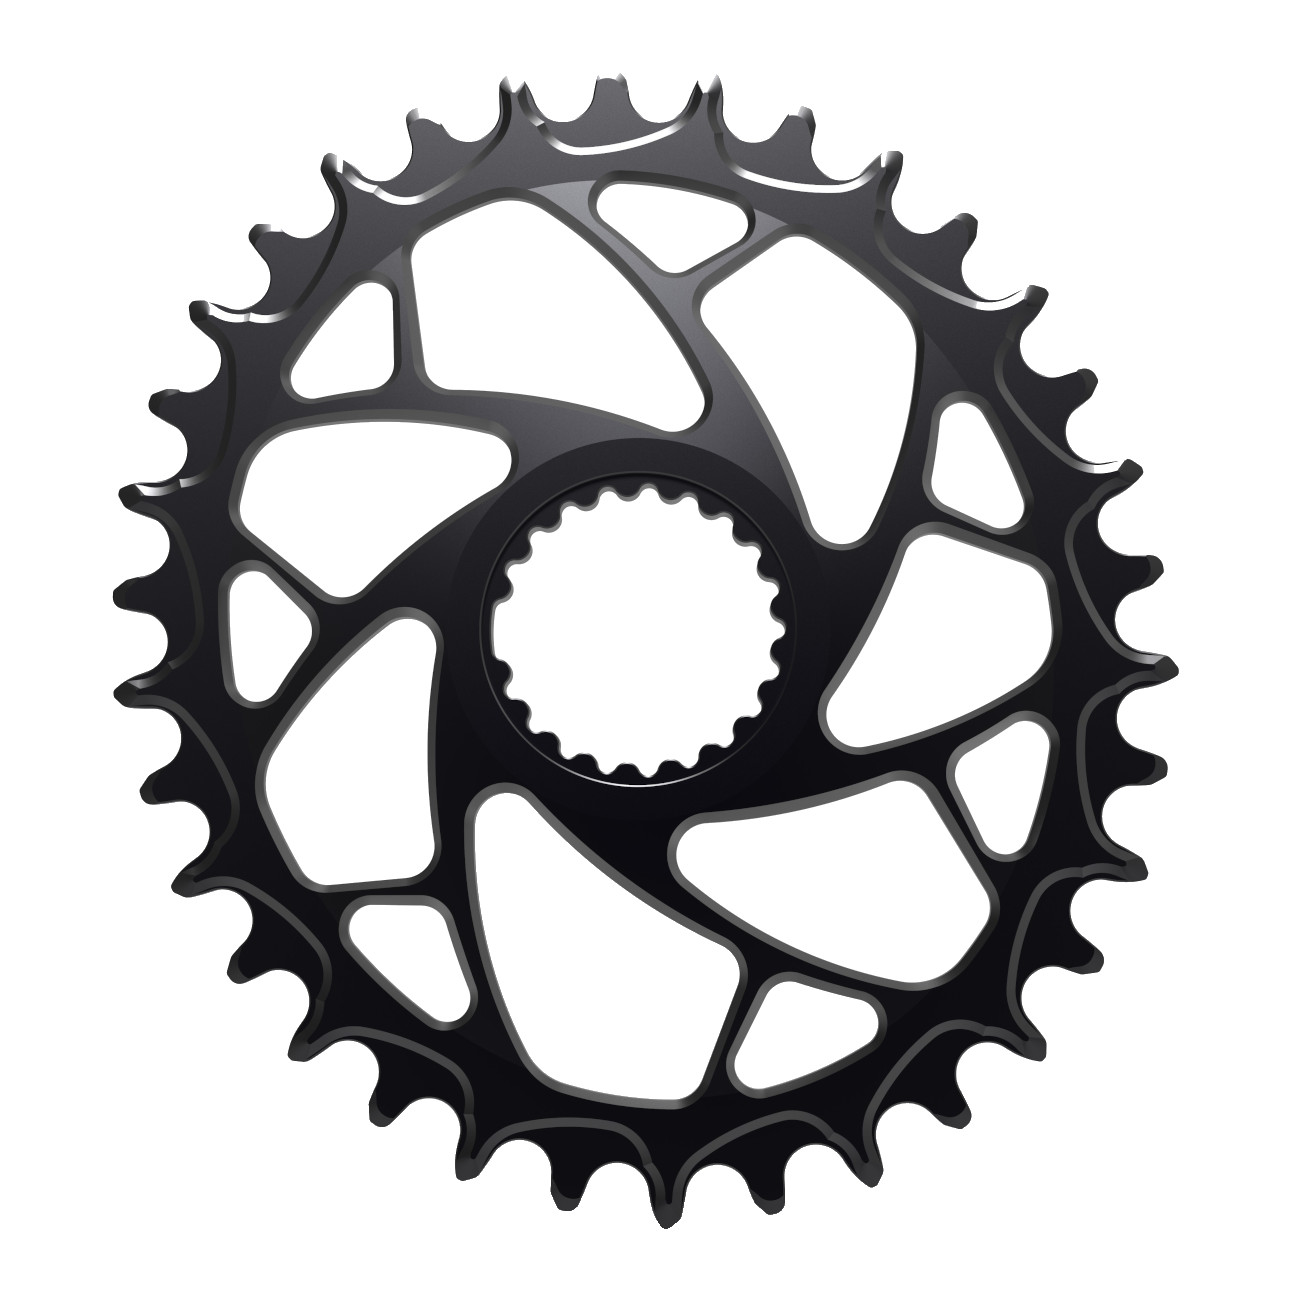 Productfoto van Alugear ELM Narrow Wide Boost MTB Chainring - Oval - for 1x Shimano 12-spd Direct Mount